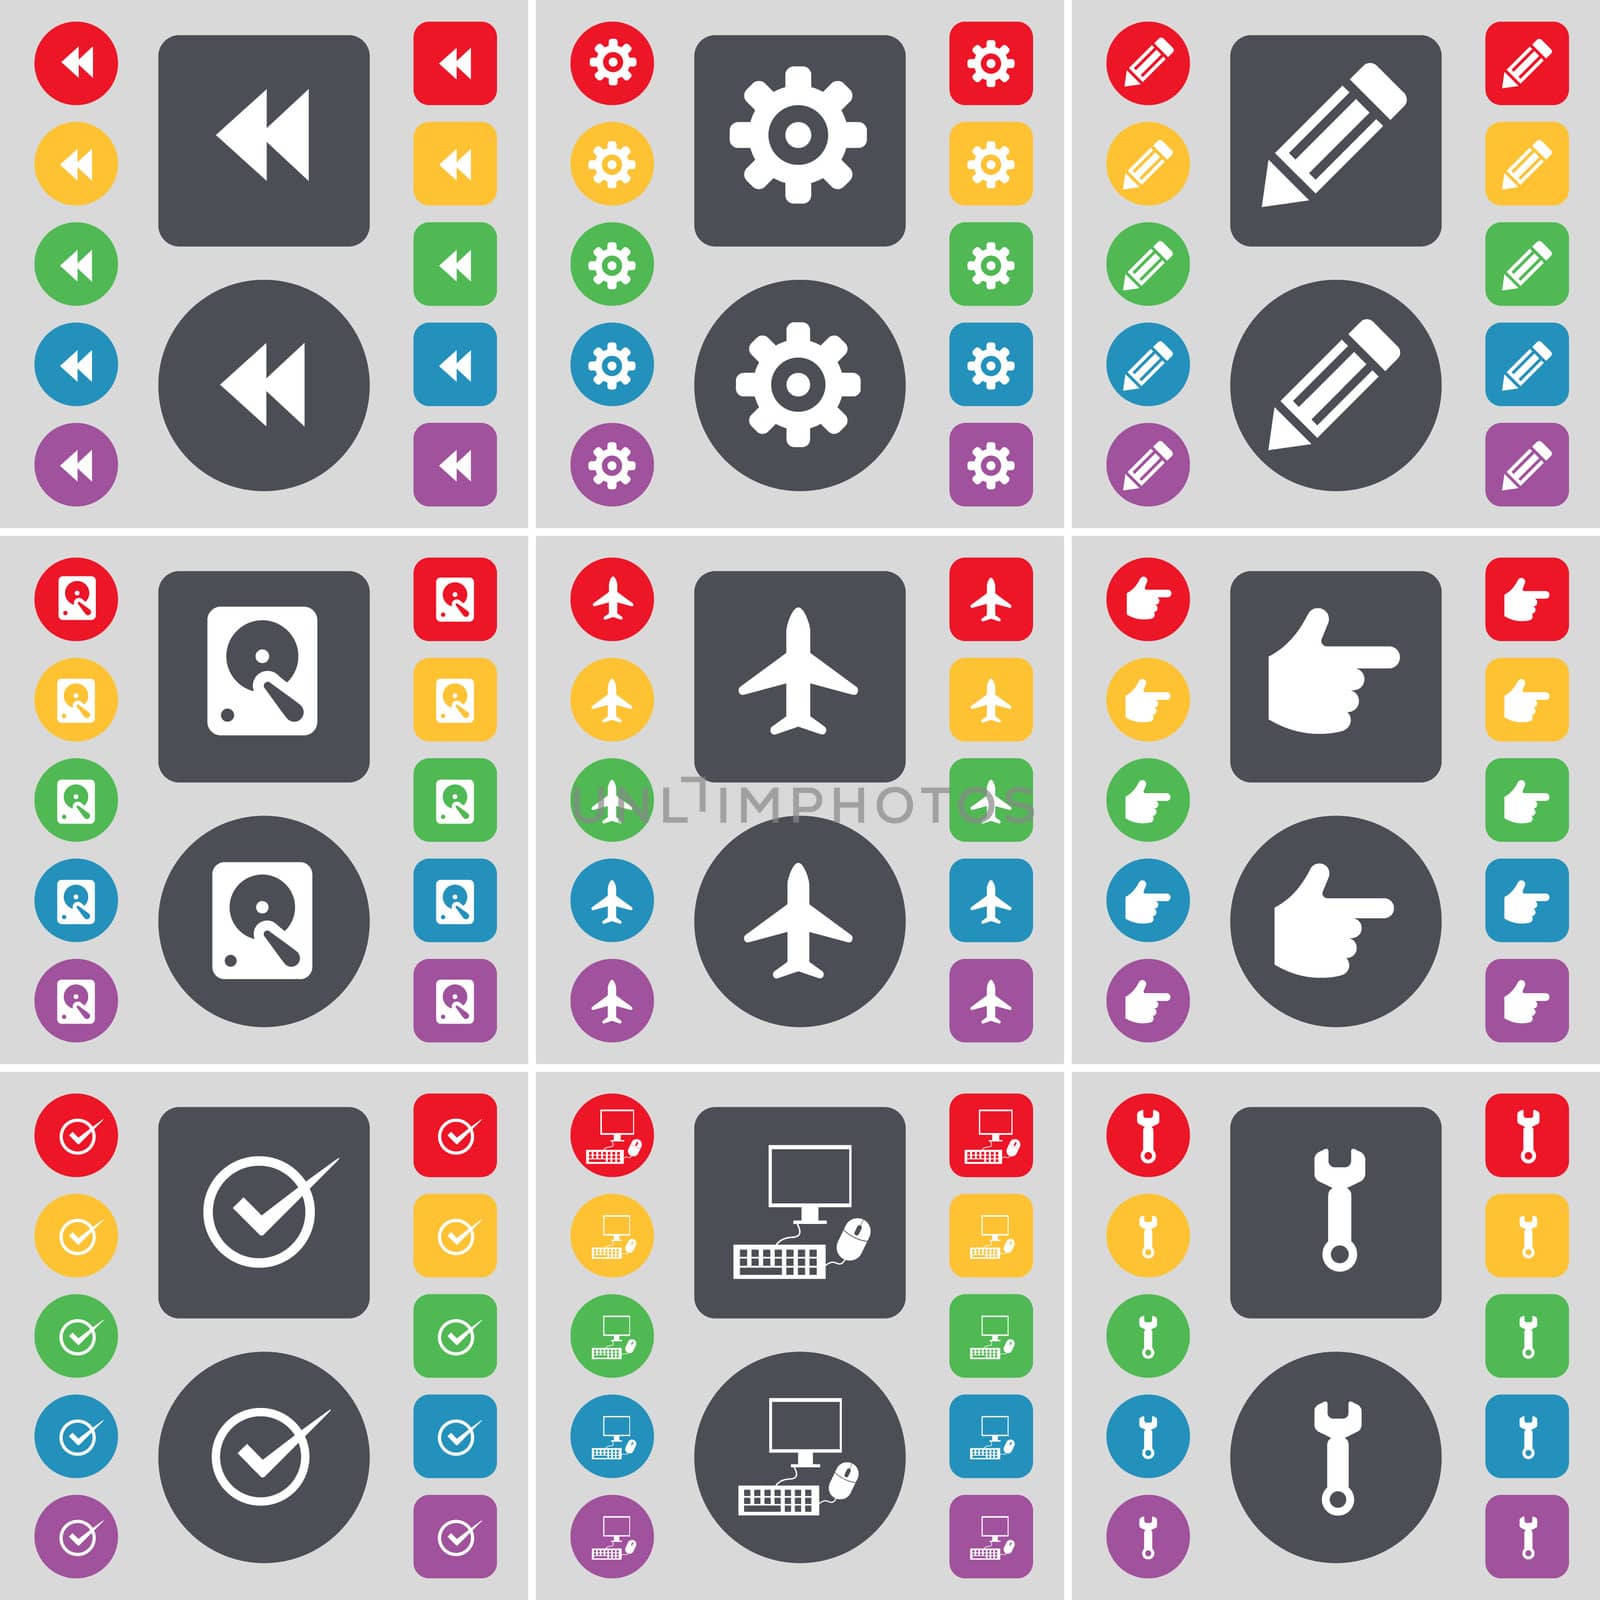 Rewind, Gear, Pencil, Hard drive, Airplane, Hand, Tick, PC, Wrench icon symbol. A large set of flat, colored buttons for your design. illustration